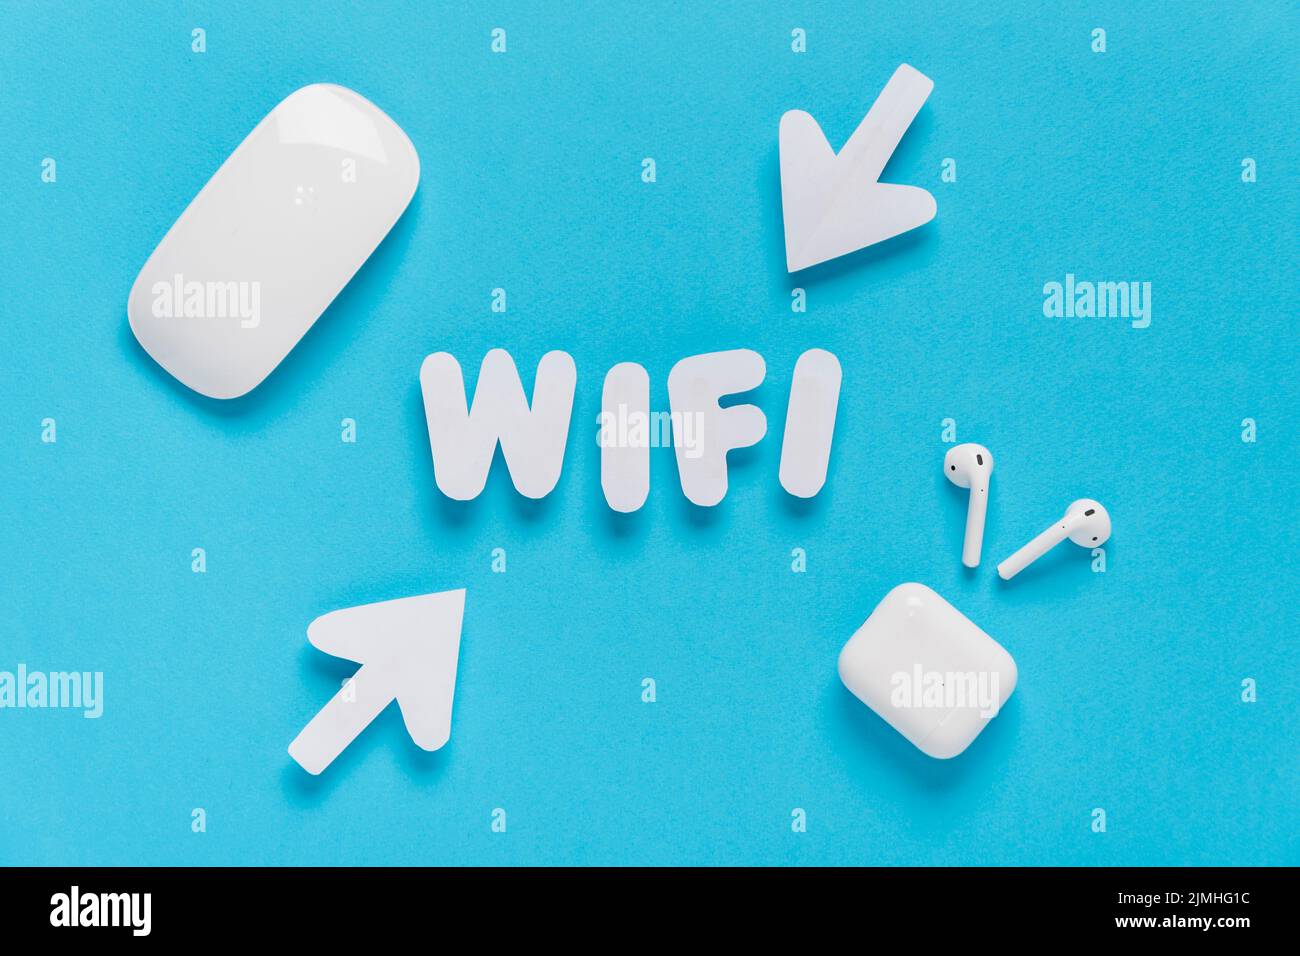 Wifi spelled out with arrows Stock Photo